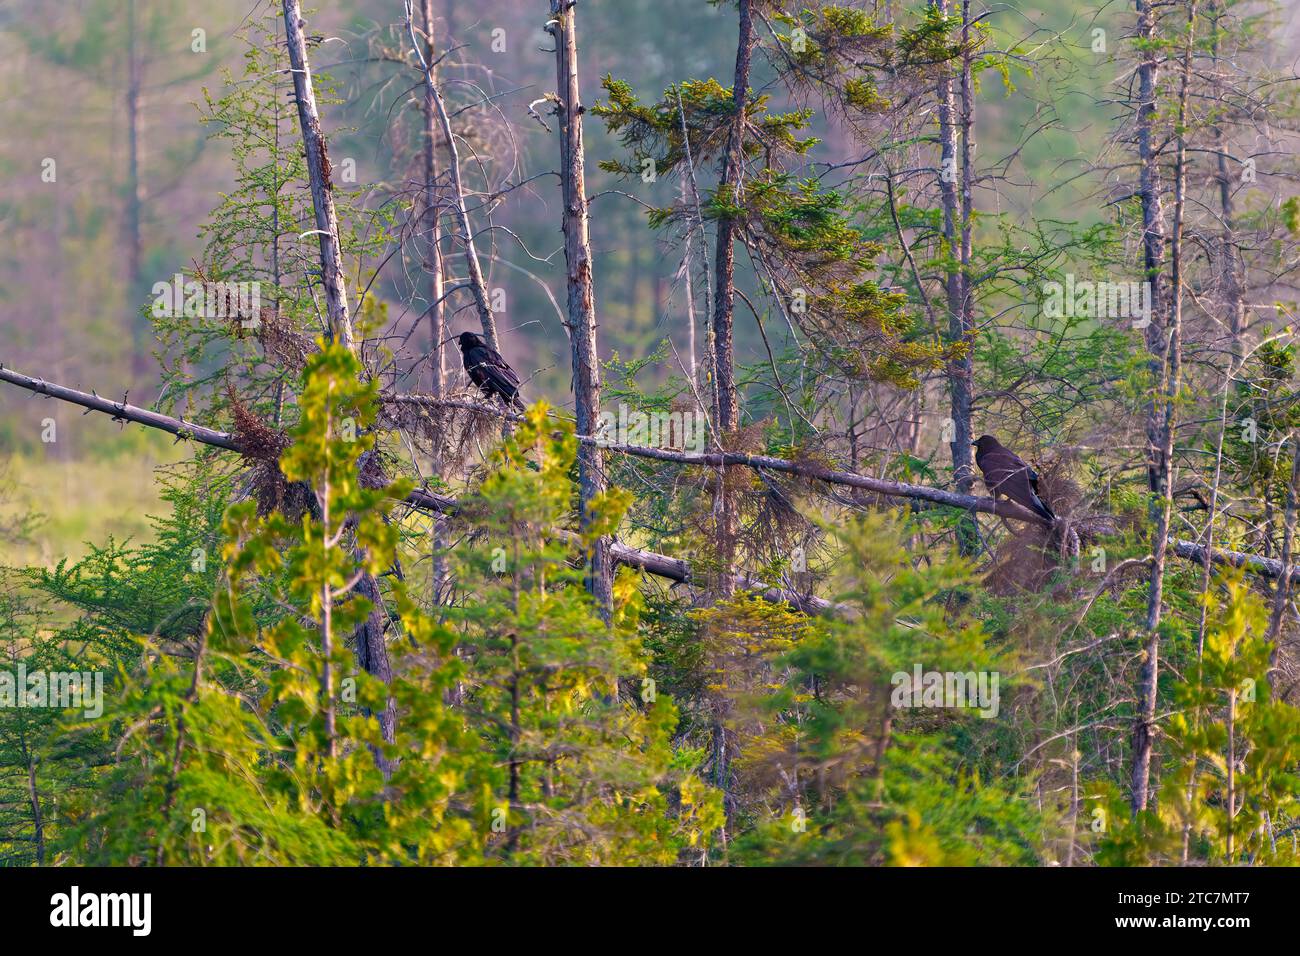 Summer scenery landscape with coniferous forest and two raven perched on a fallen tree with a blur forest background. Art Photo. Stock Photo